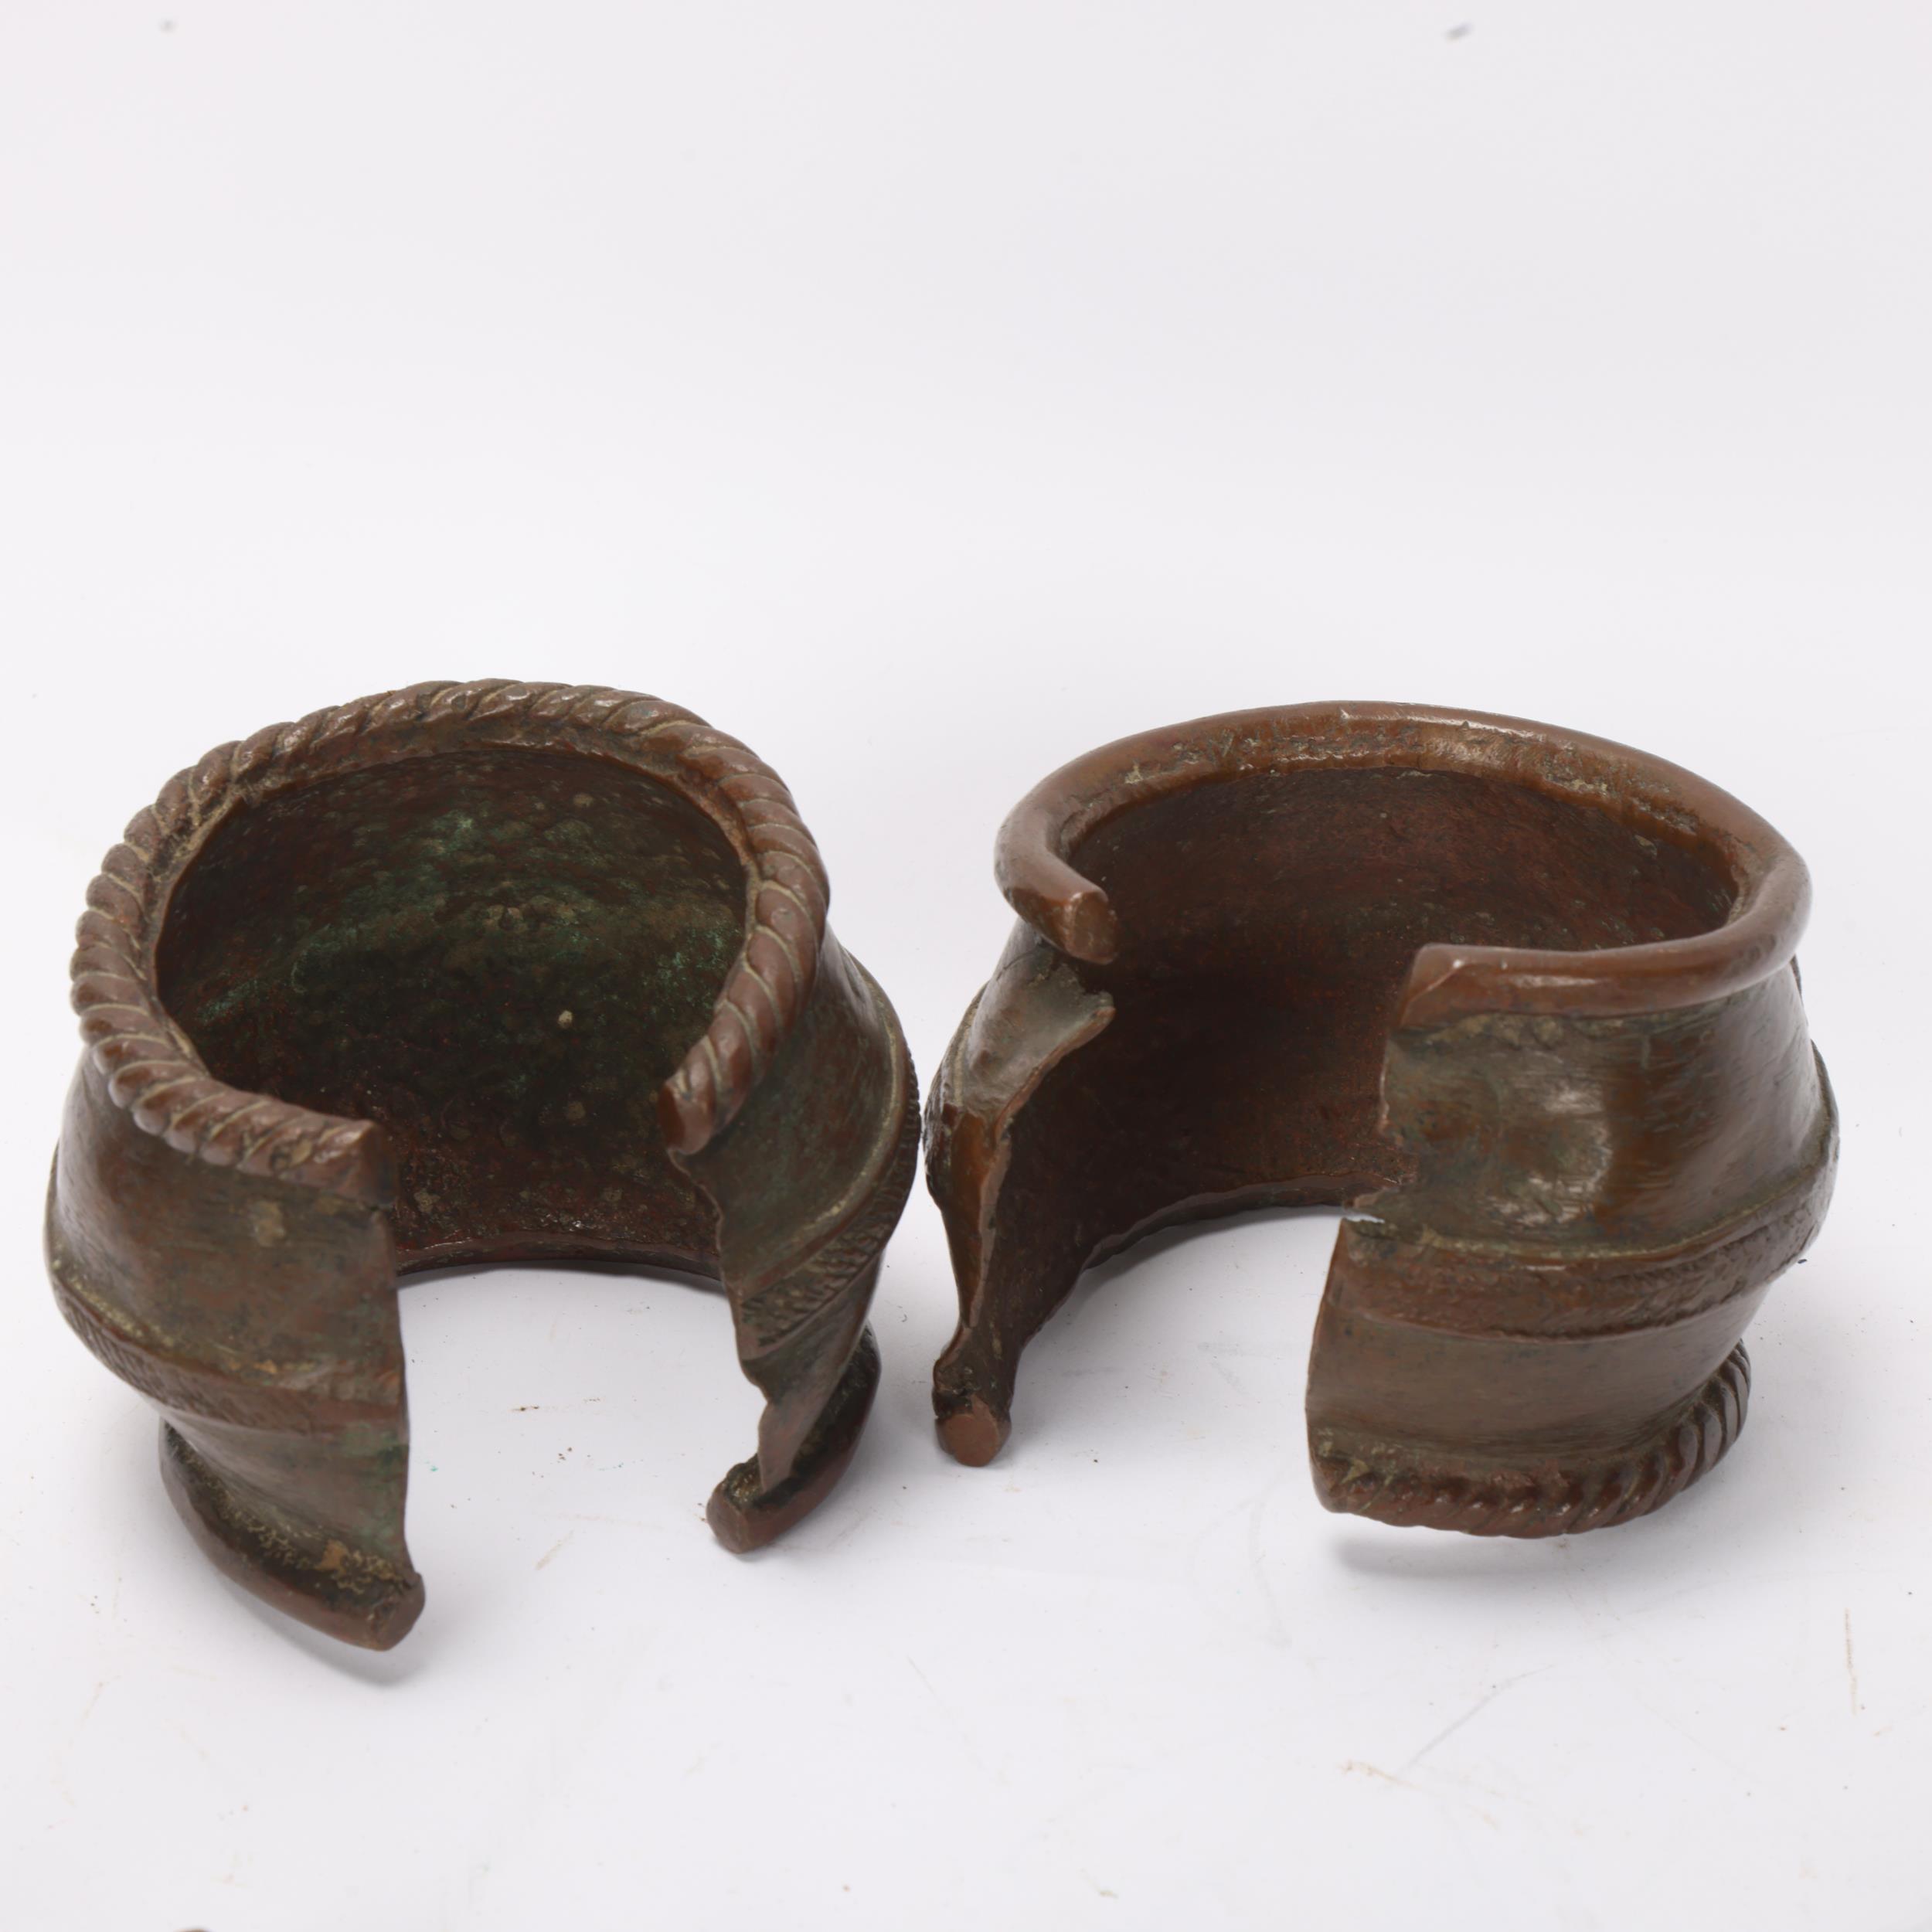 Pair of African bronze bracelets, 2 nickel currency bracelets, and 2 elephant hide bangles - Image 3 of 3